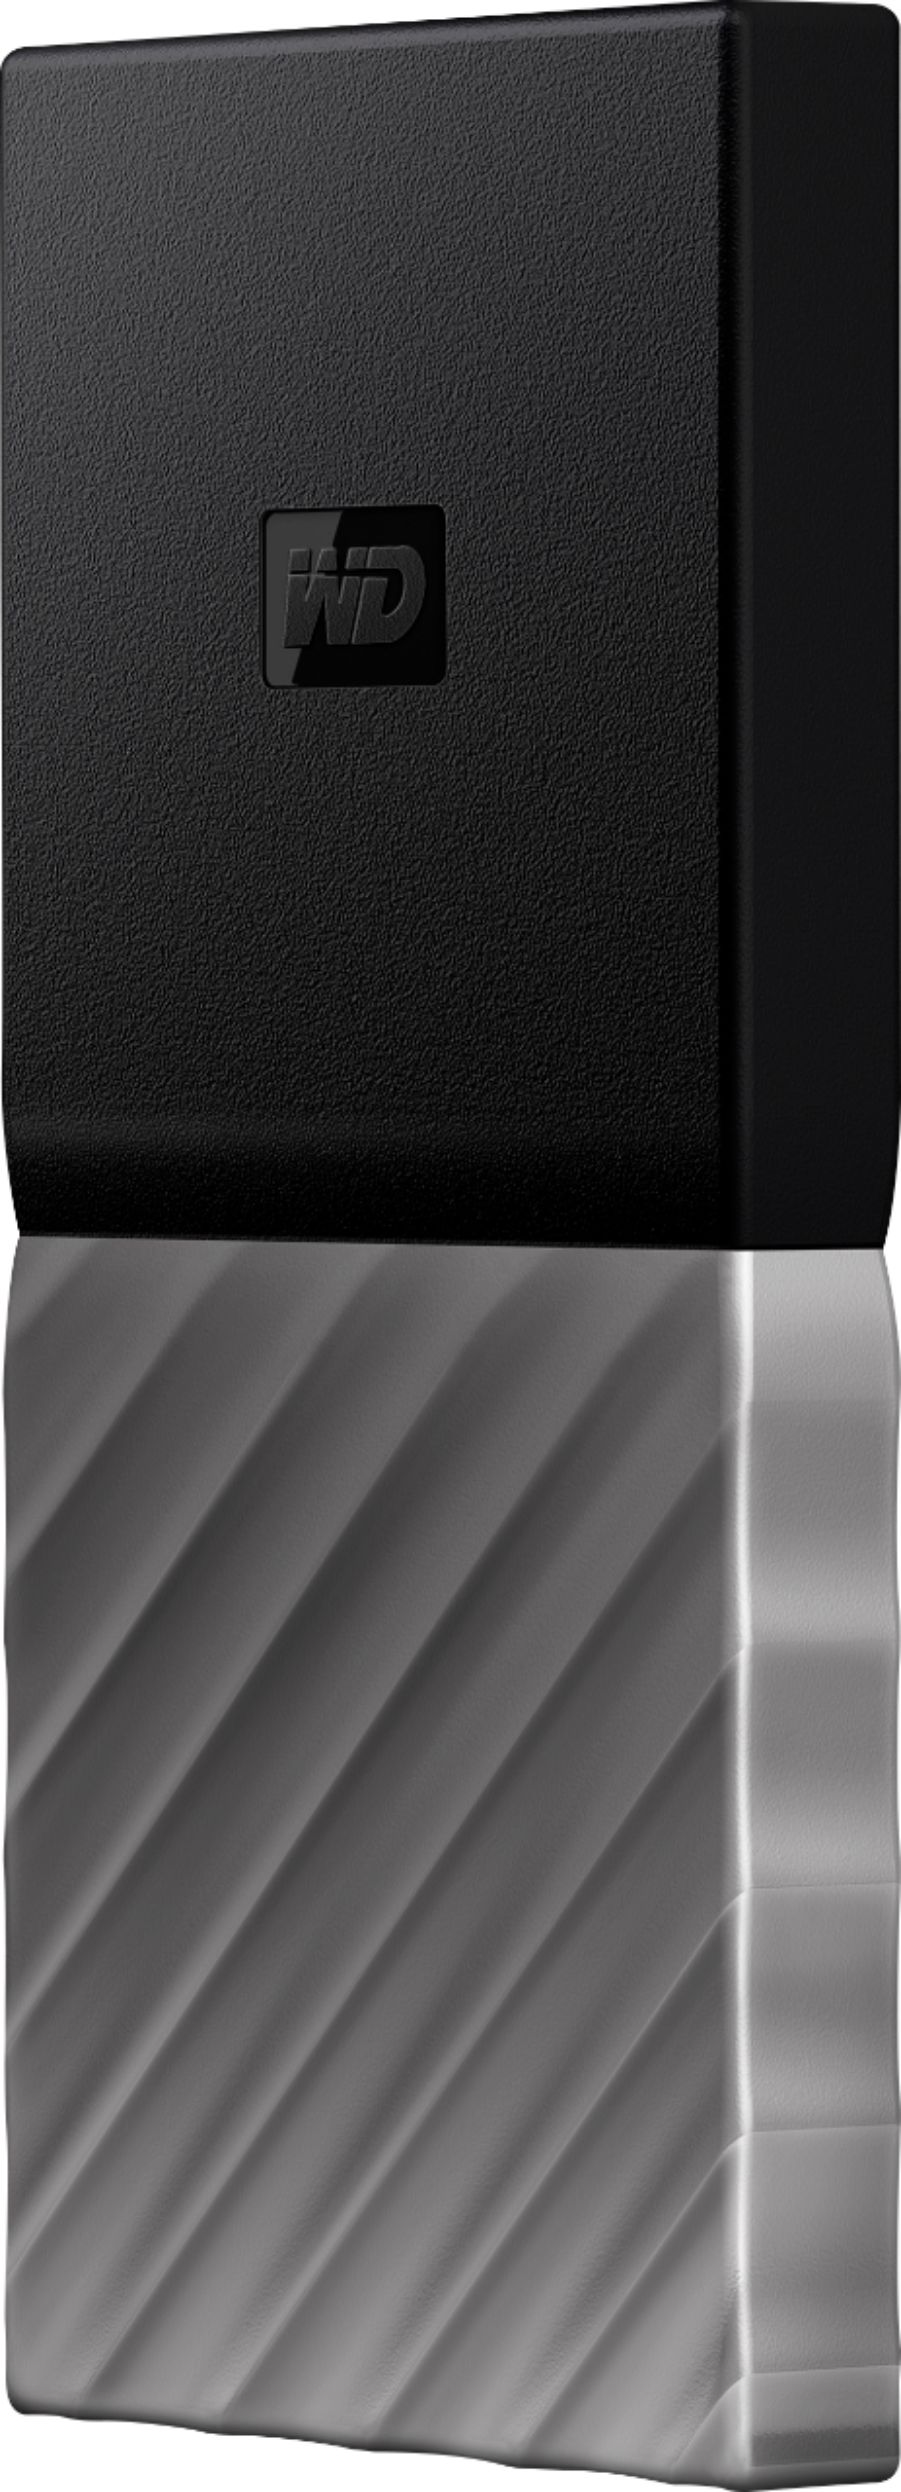 Left View: WD - My Passport SSD 1TB External USB 3.1 Gen 2 Portable Solid State Drive - Black